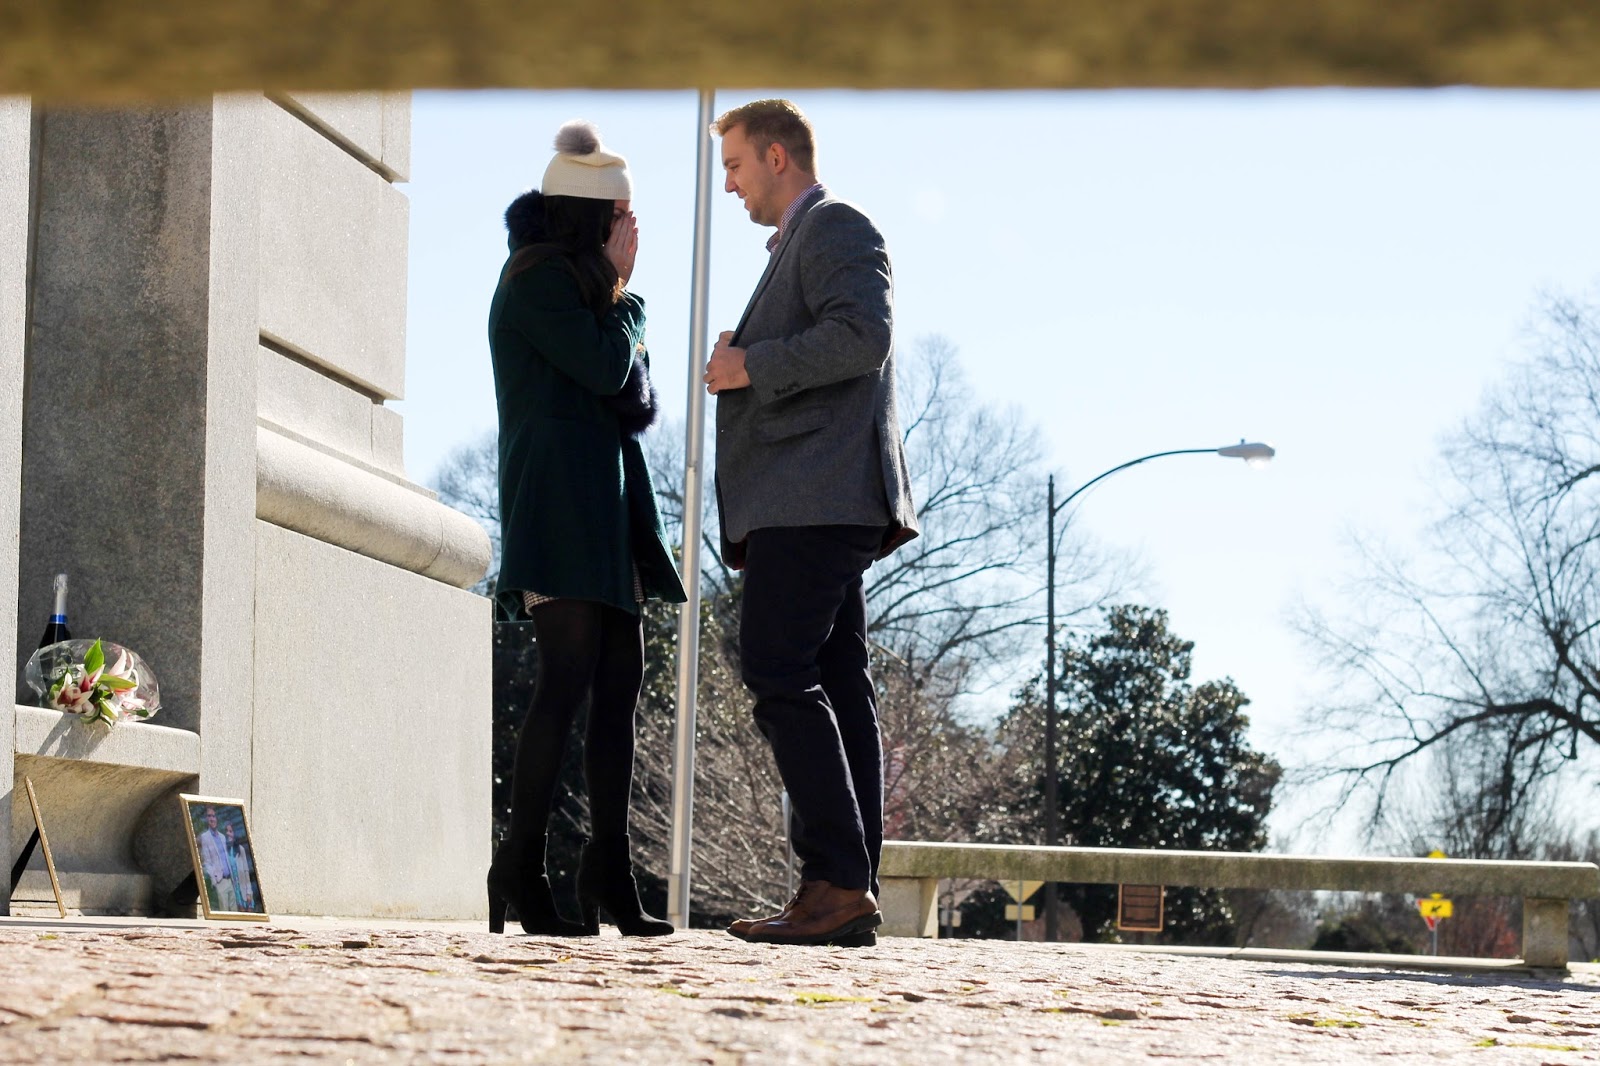 NC State Bell Tower Photos, NC State Bell Tower Photography Ideas, NC State Proposal, NC State engagement, nc state couple, pretty in the pines, fashion blogger, blogger bride to be